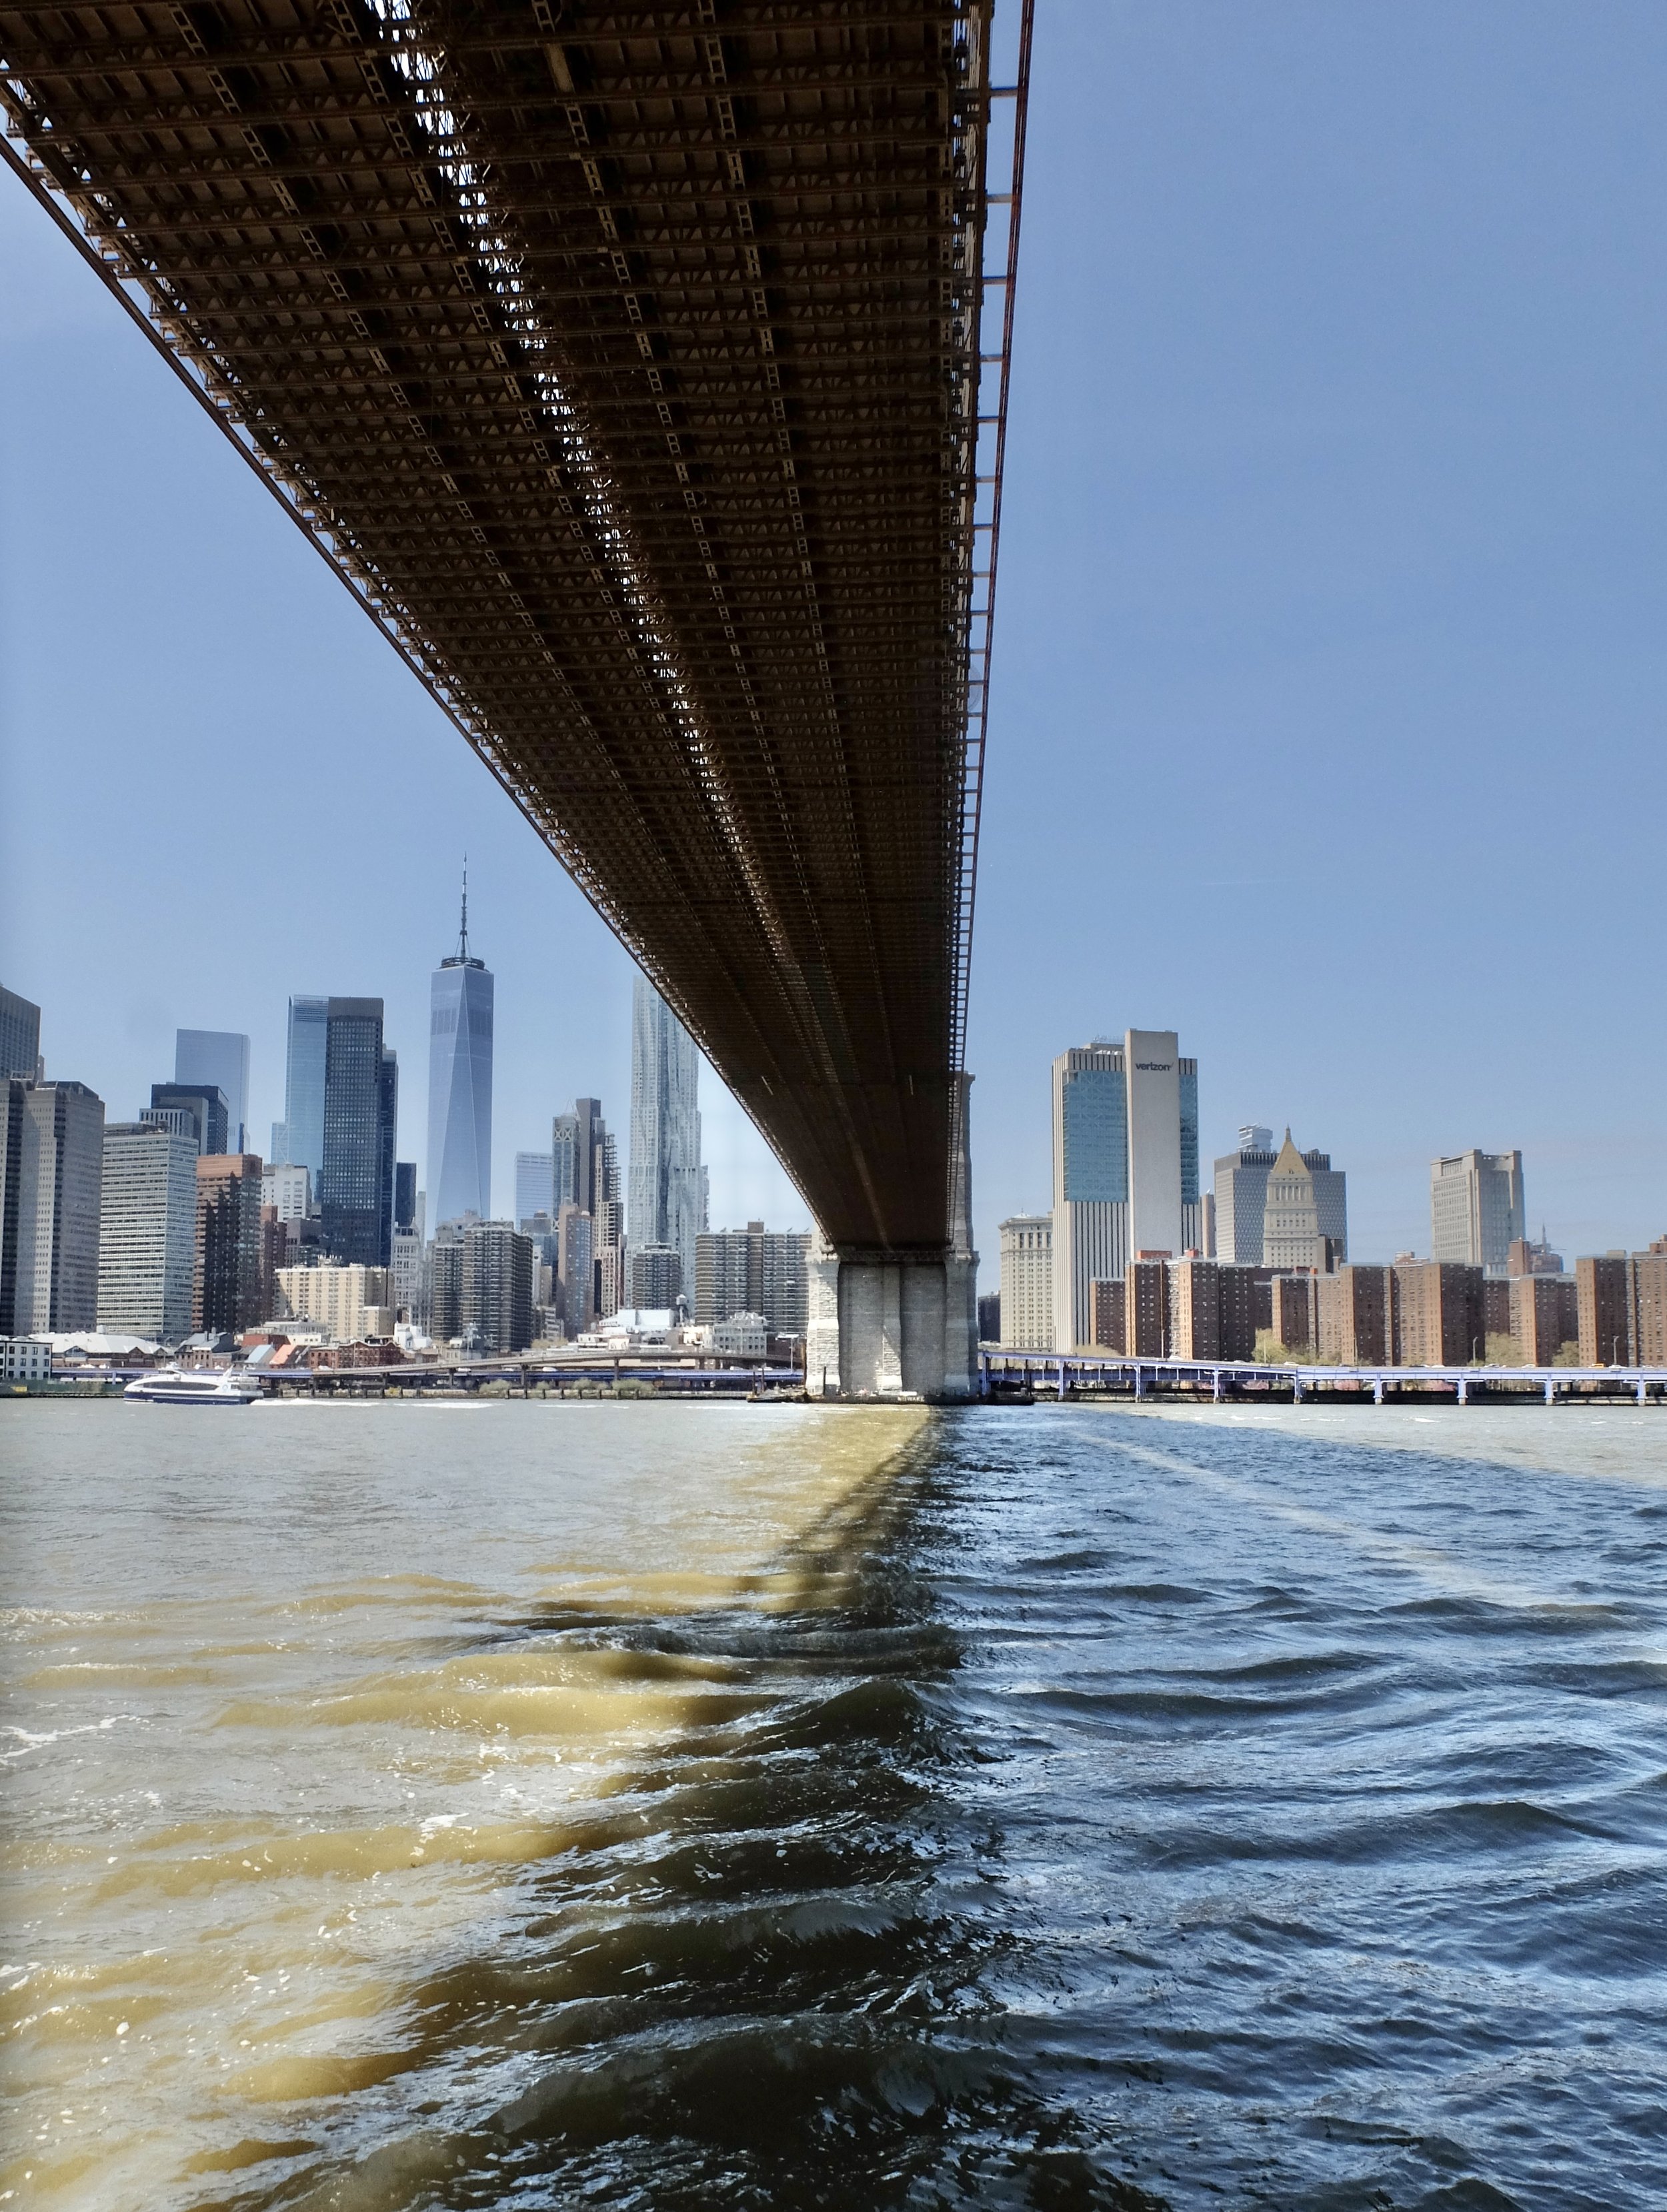 The Brooklyn Bridge Park was recently extended under the bridge to the new...